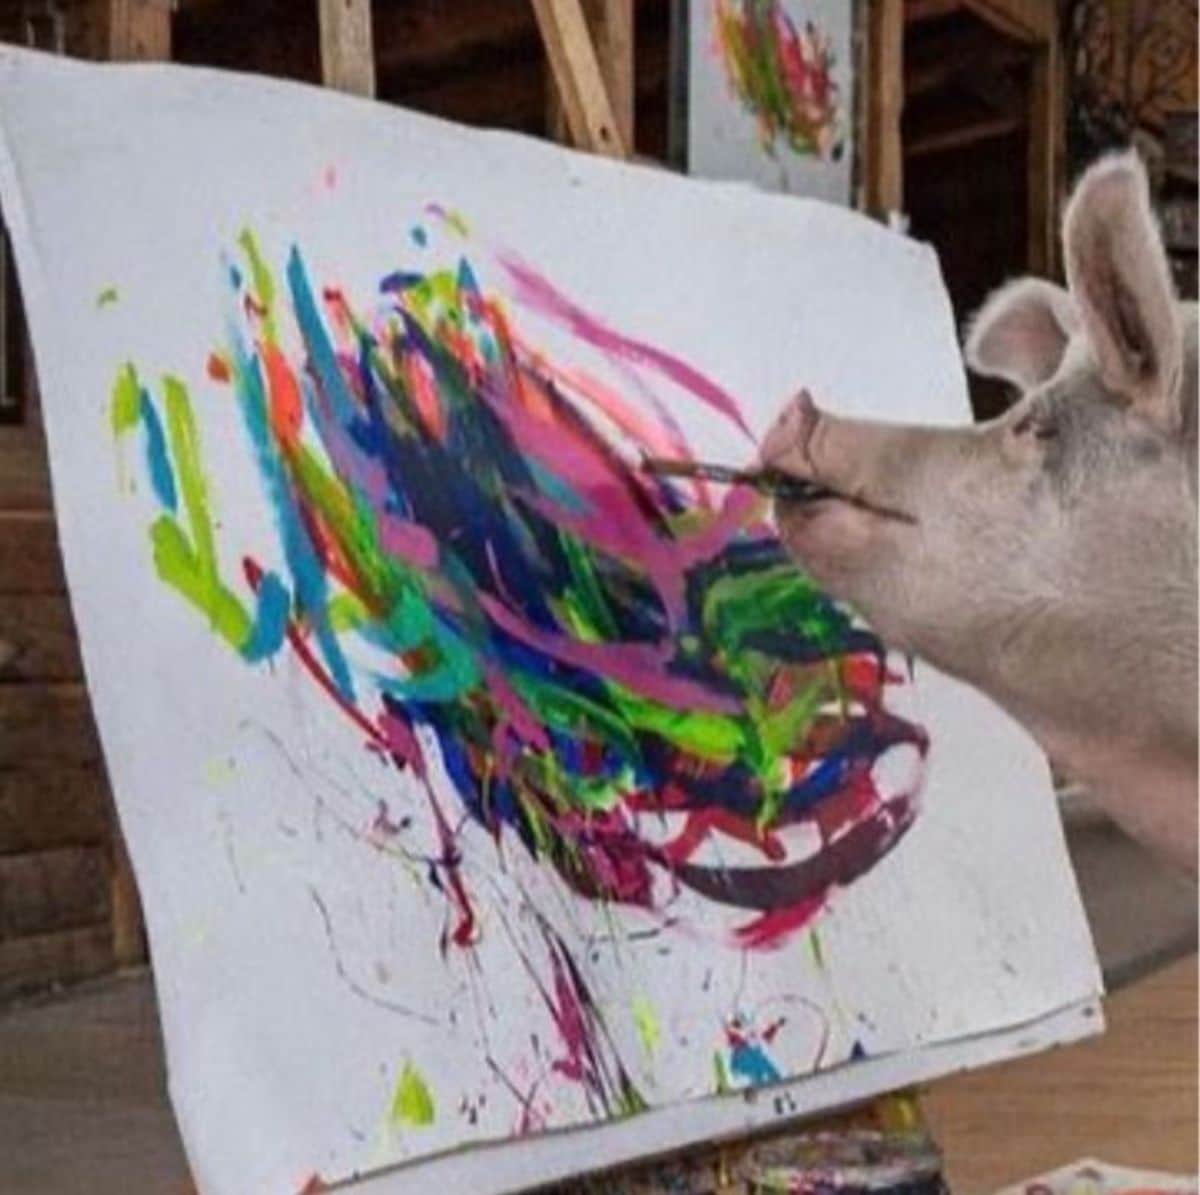 white pig holding a paintbrush in its mouth and painting on a white canvas with colourful paint on it